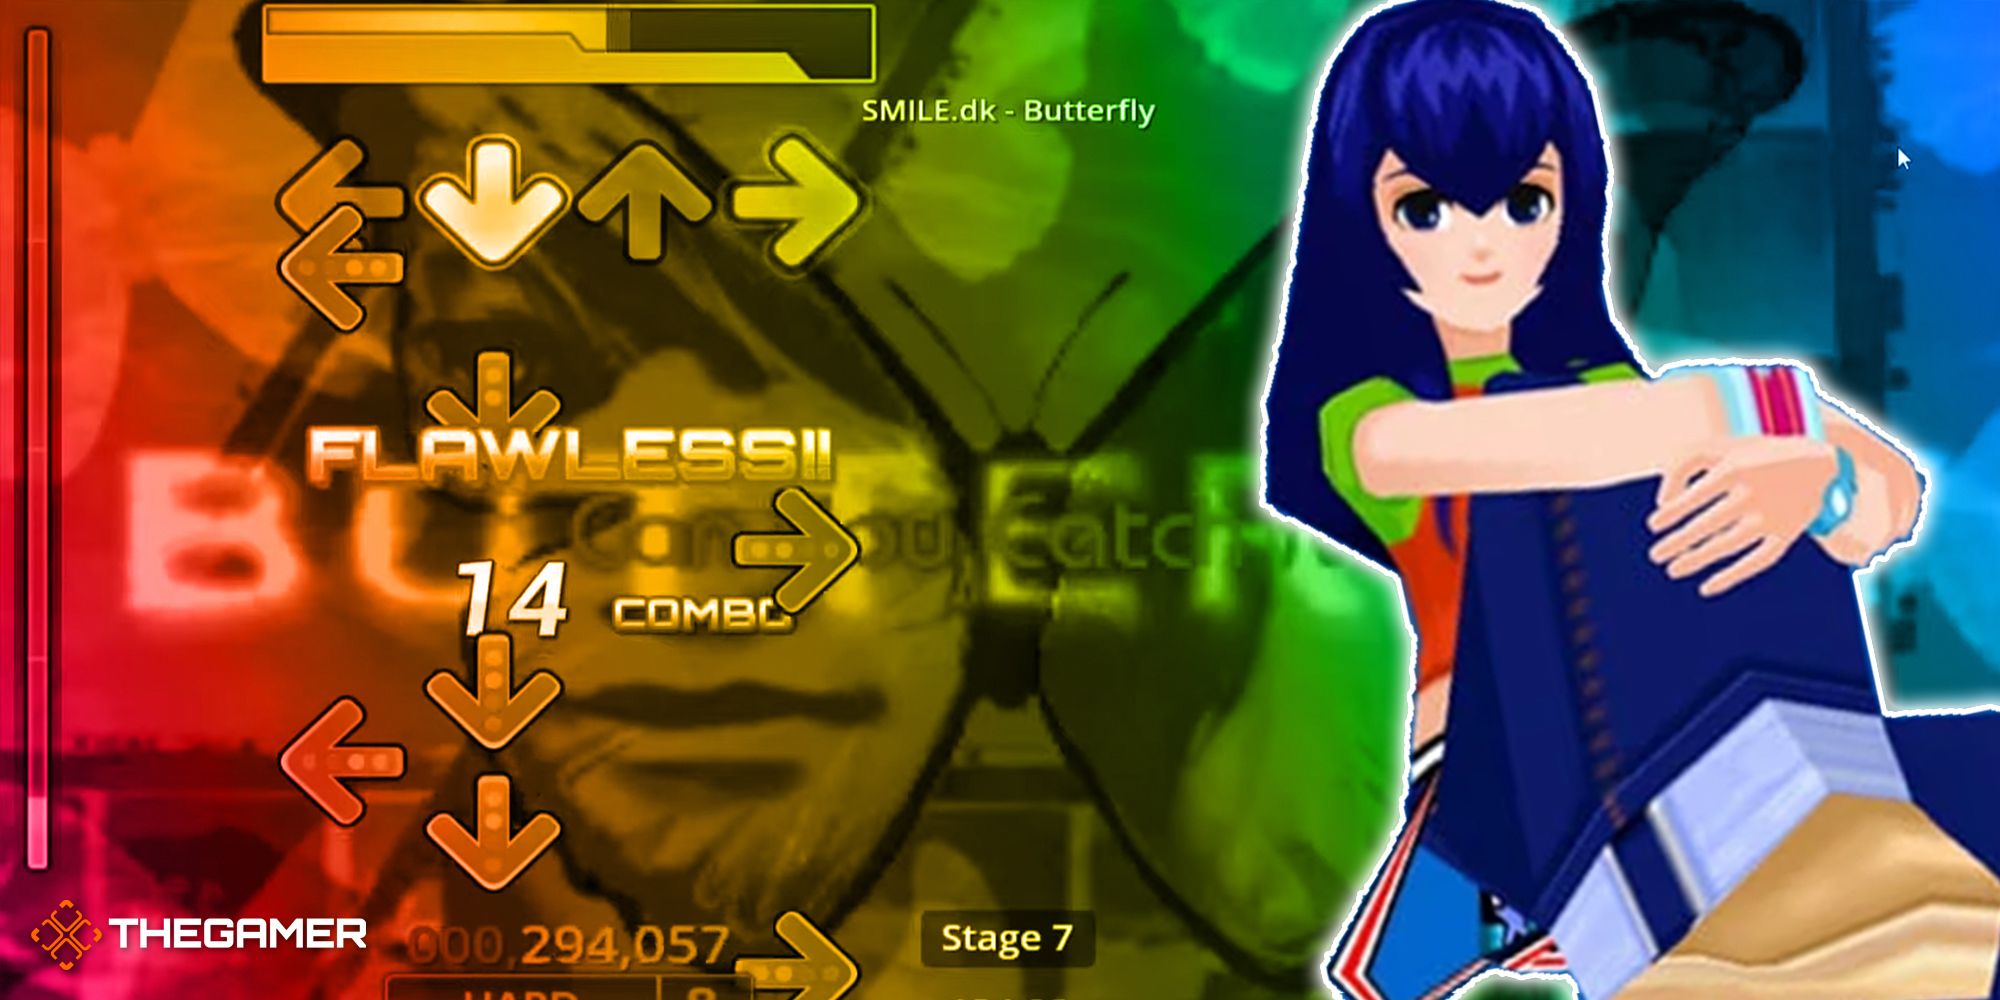 Alice, from Dance Dance Revolution, sits in front of a colorful background featuring gameplay of the song, Butterfly, by Smile.dk.